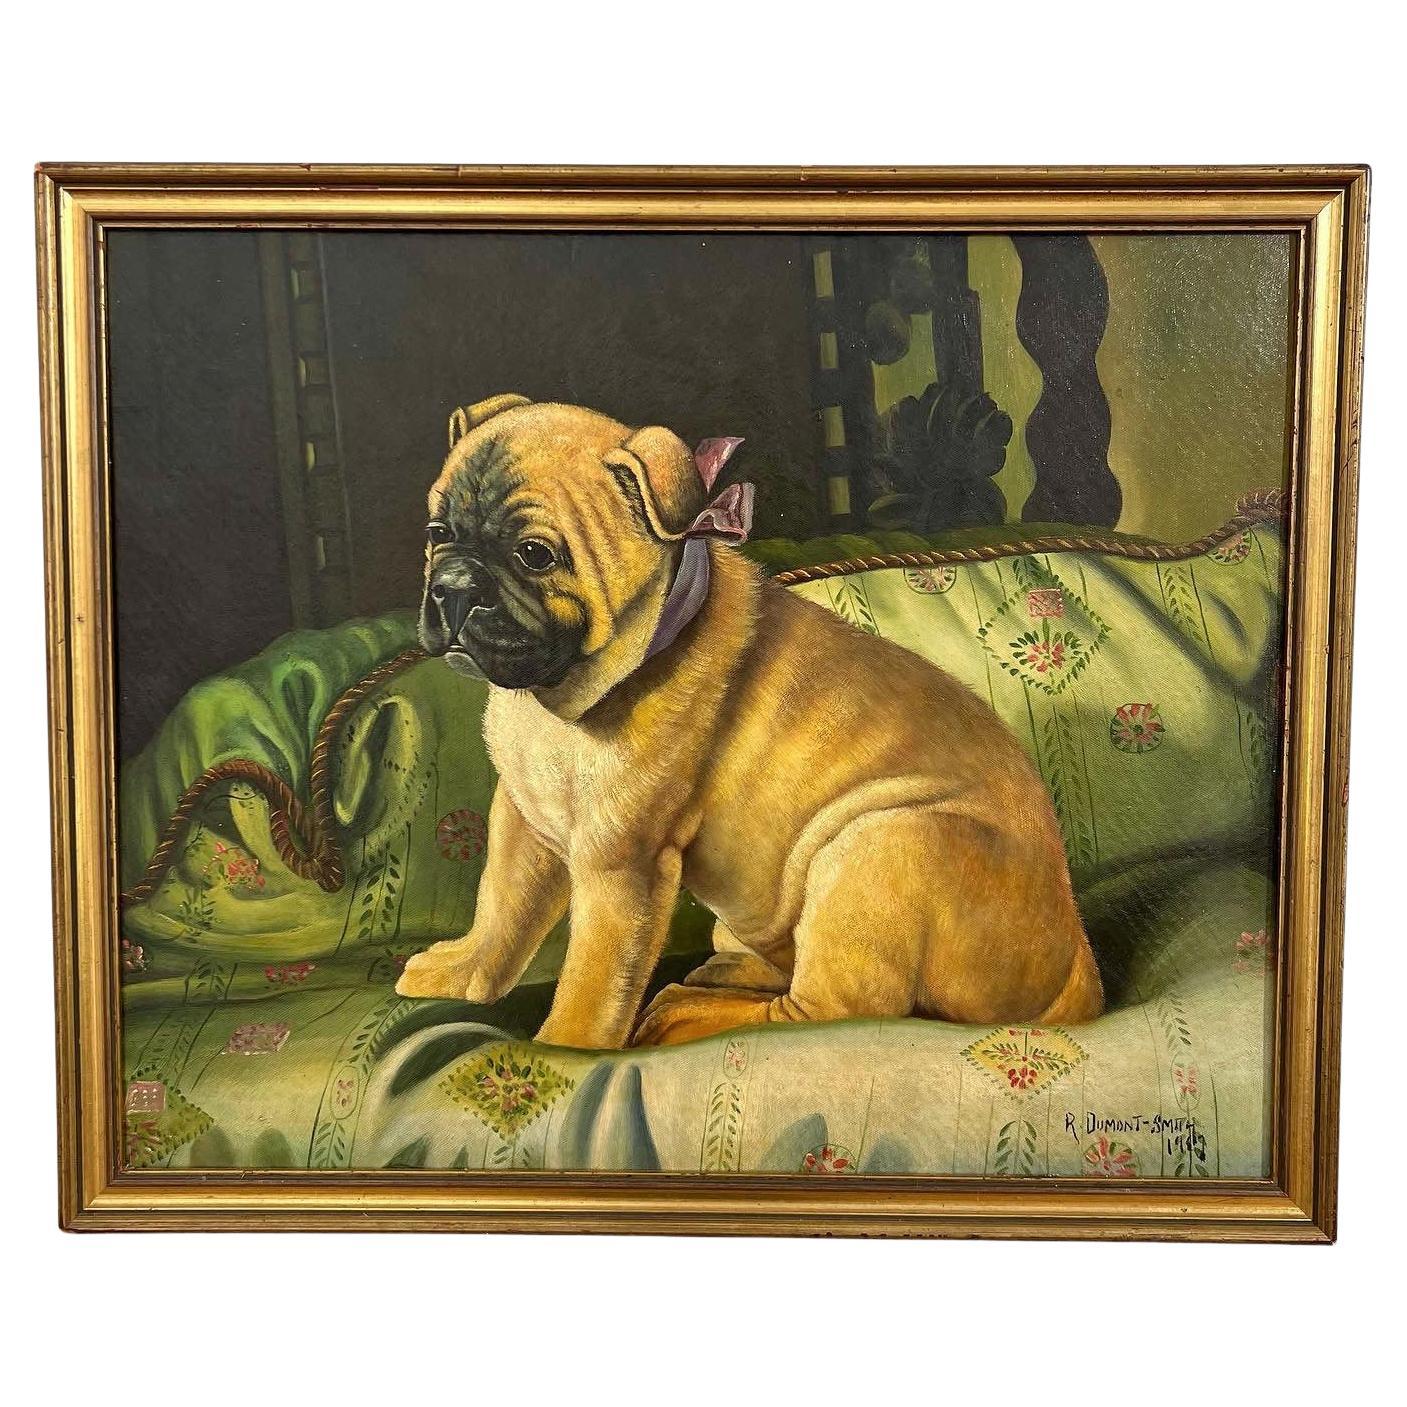 Portrait of a Pampered Pug by Robert Dumont-Smith D. 1957